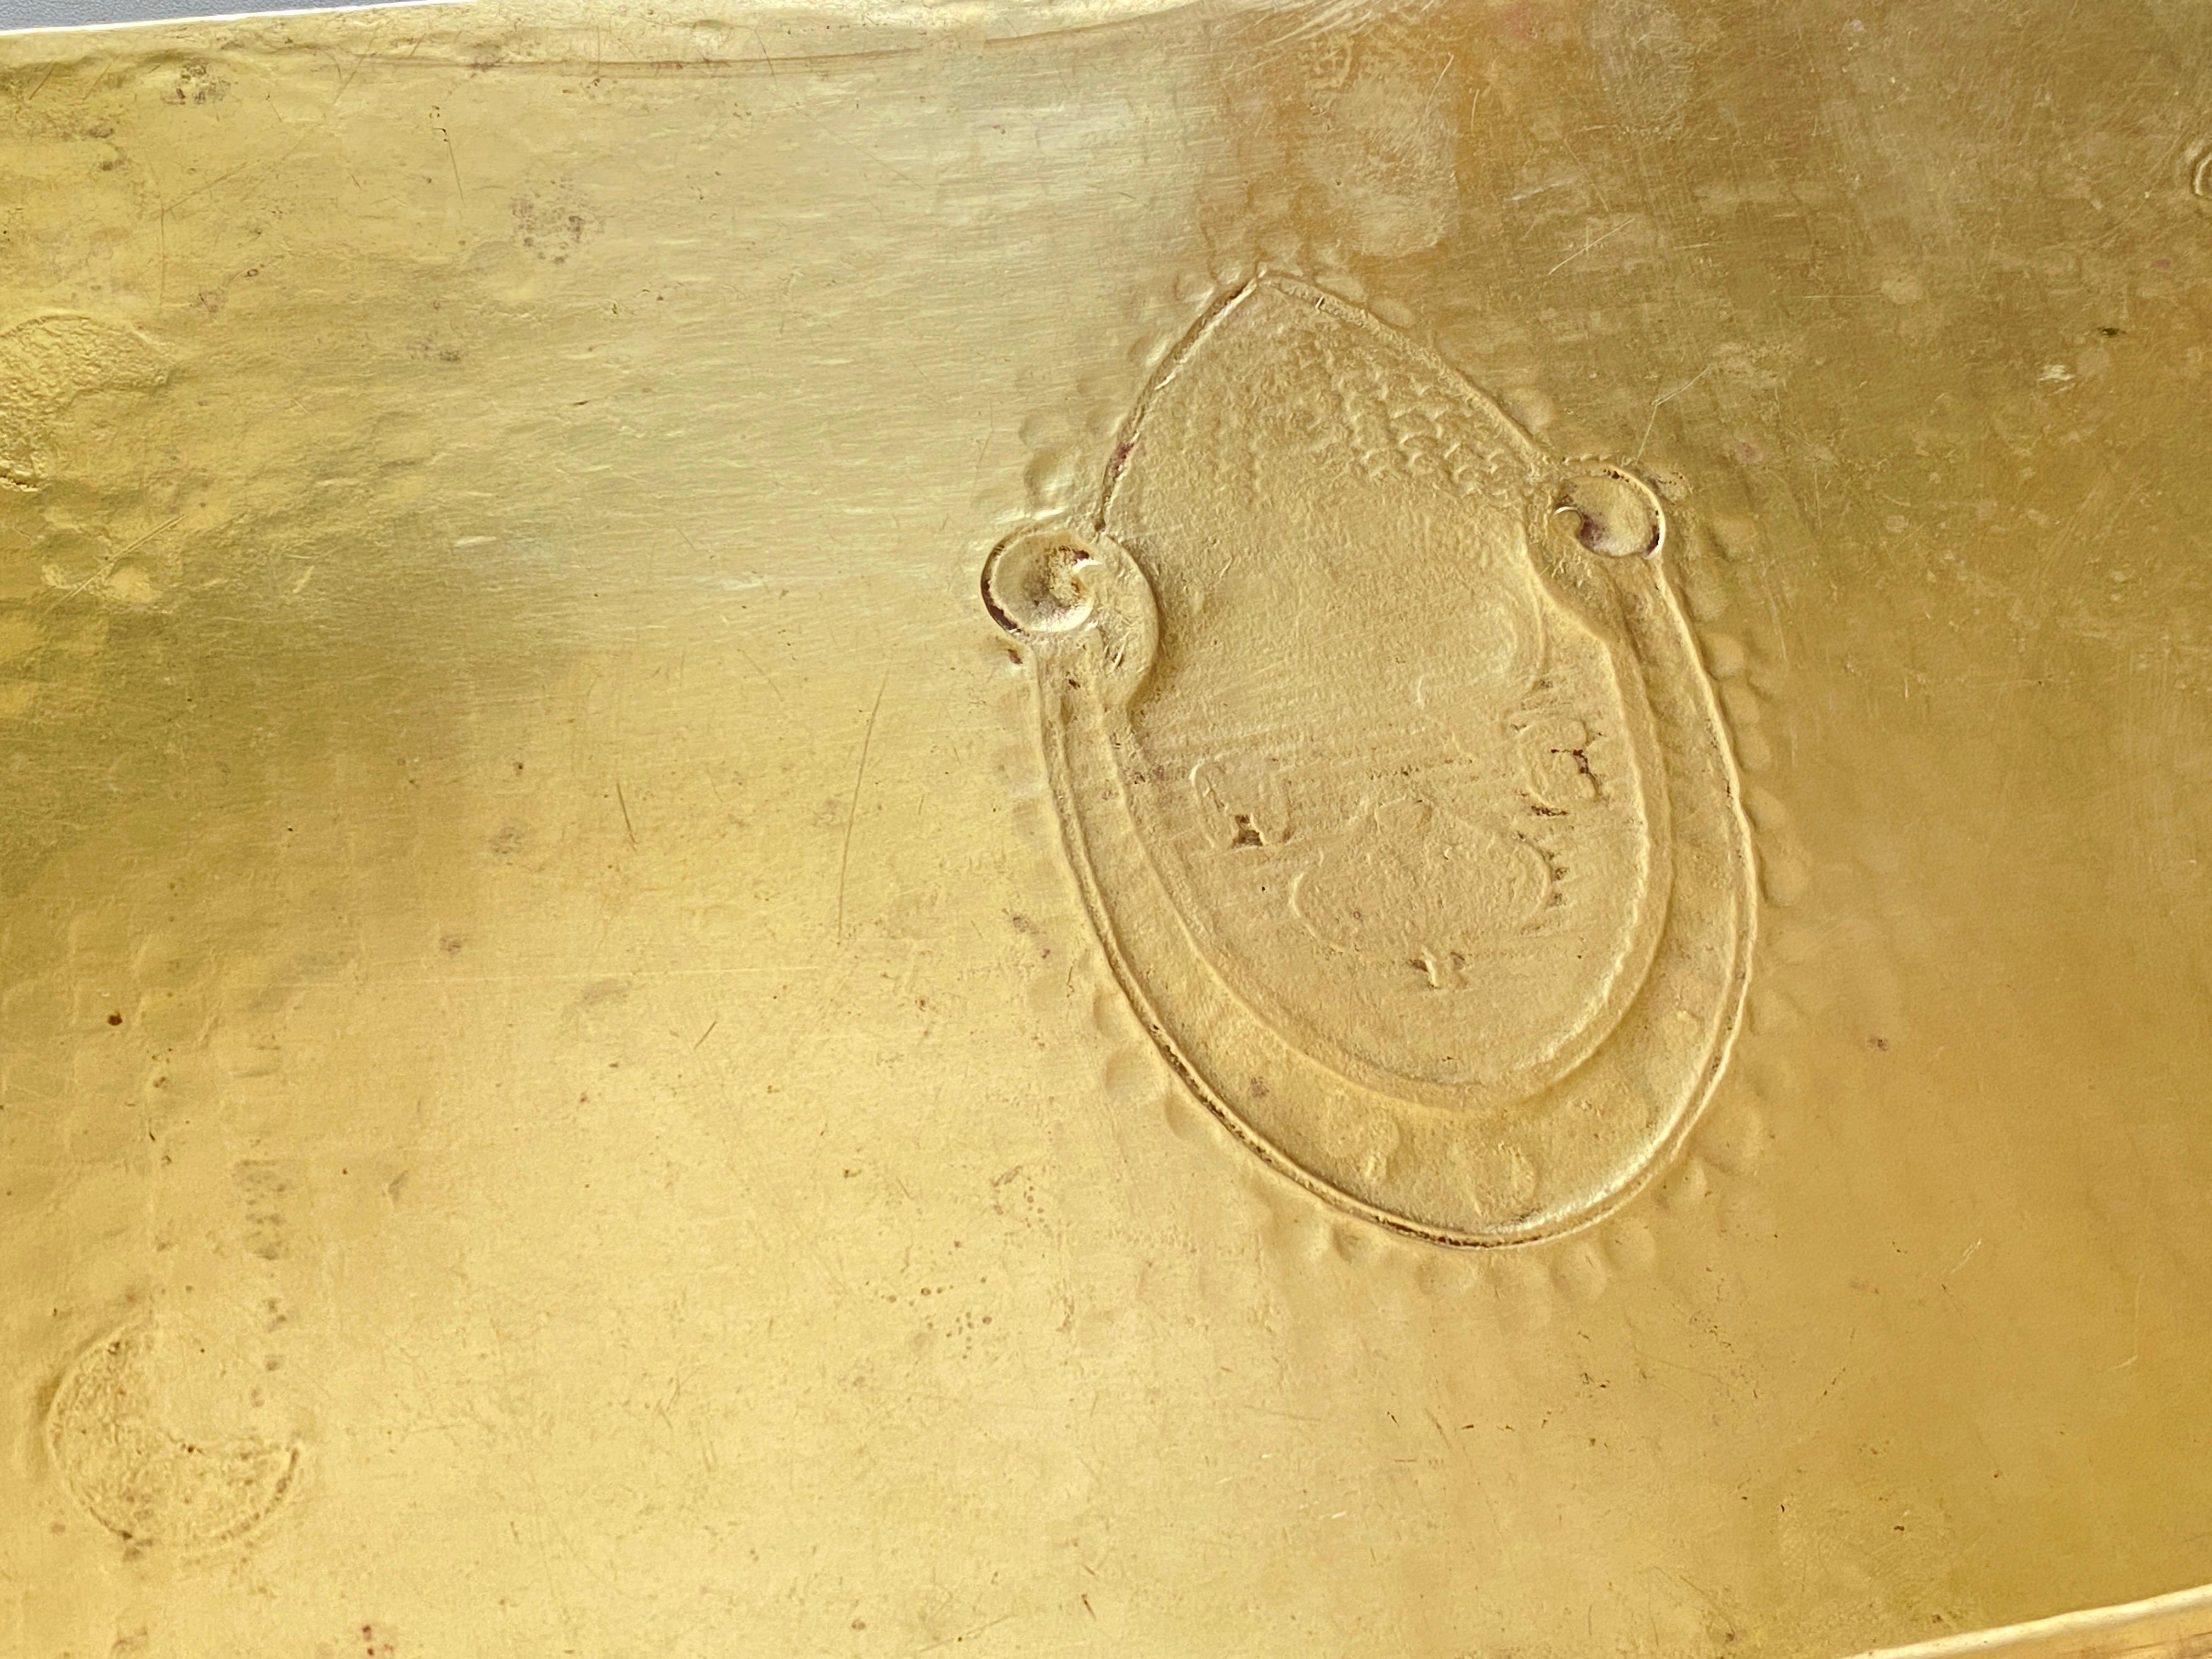 It is a tray from the Art Deco period, in brass with geometric patterns. It was made in France around the 1940s. It is gold in color. Signed and stamped Handaye.